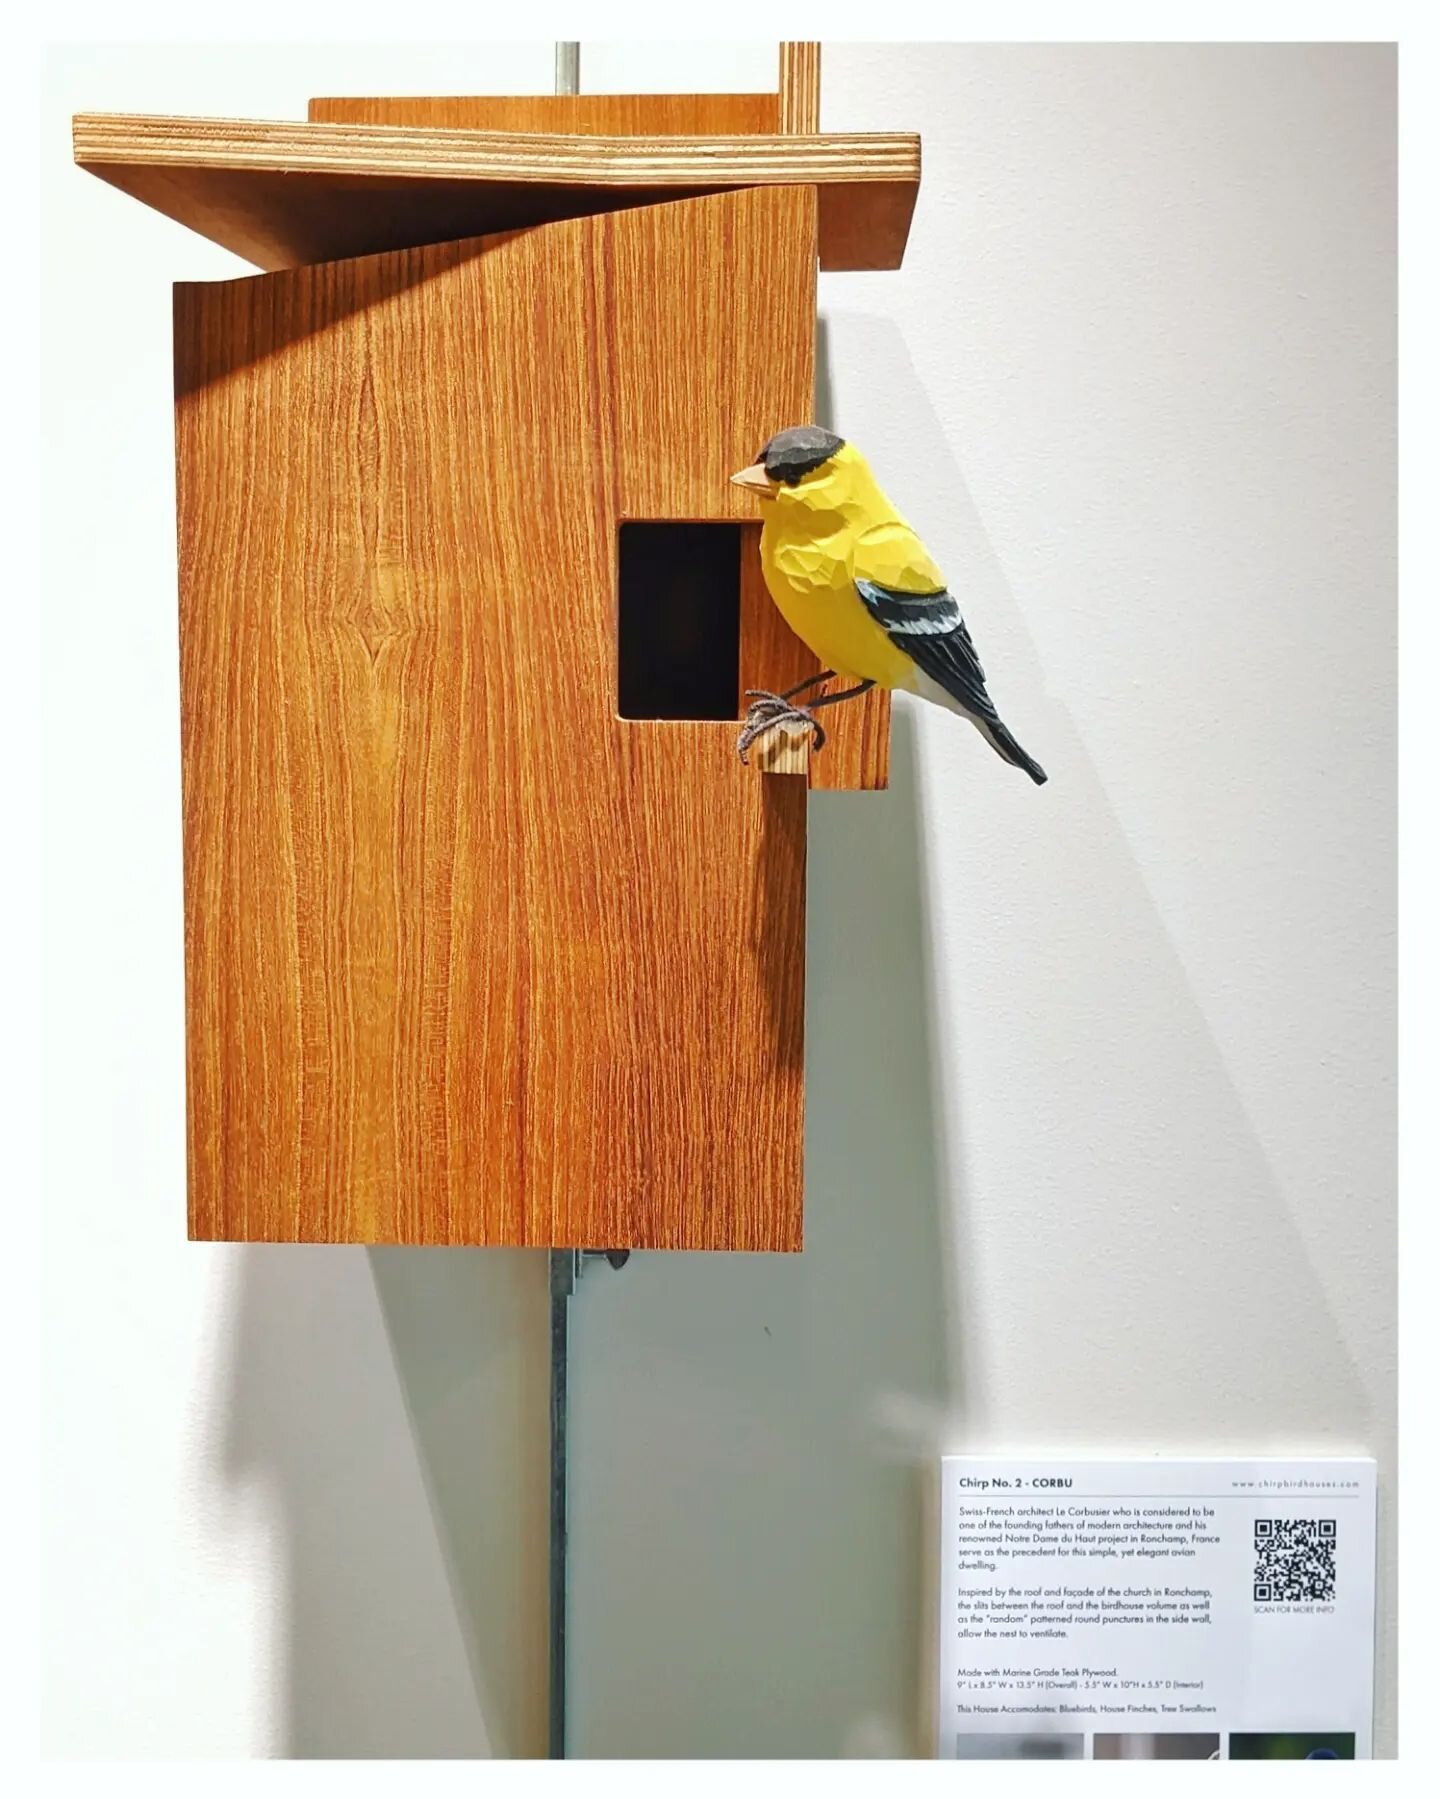 We're starting this new year with a library tour. First stop for the next month, you'll find our modern avian dwellings on display at the @westwoodplma (Westwood Public Library) main gallery! We're also giving a presentation there on Saturday, Januar